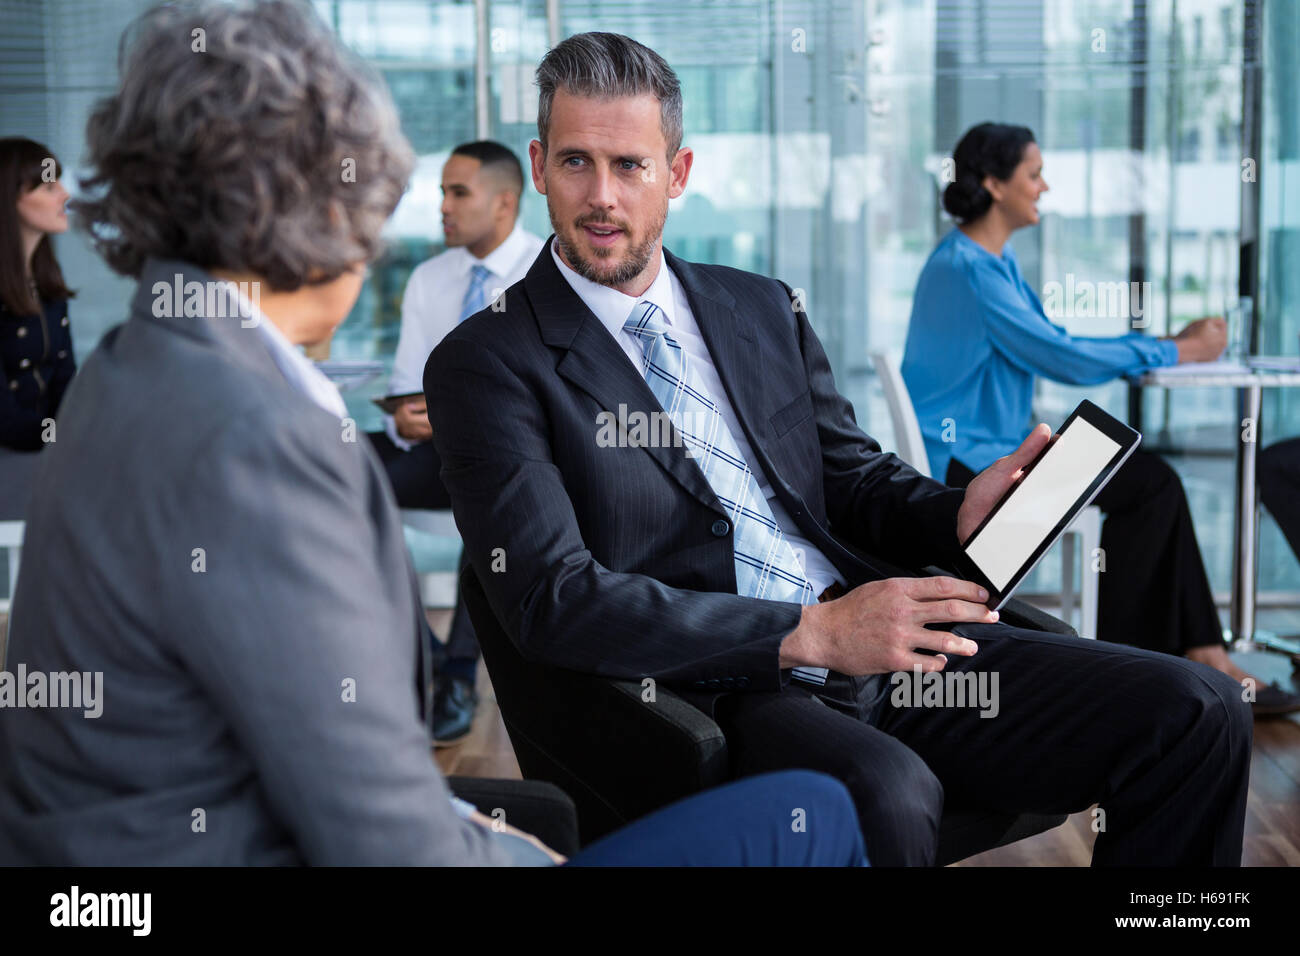 Businesspeople having discussion over digital tablet Stock Photo